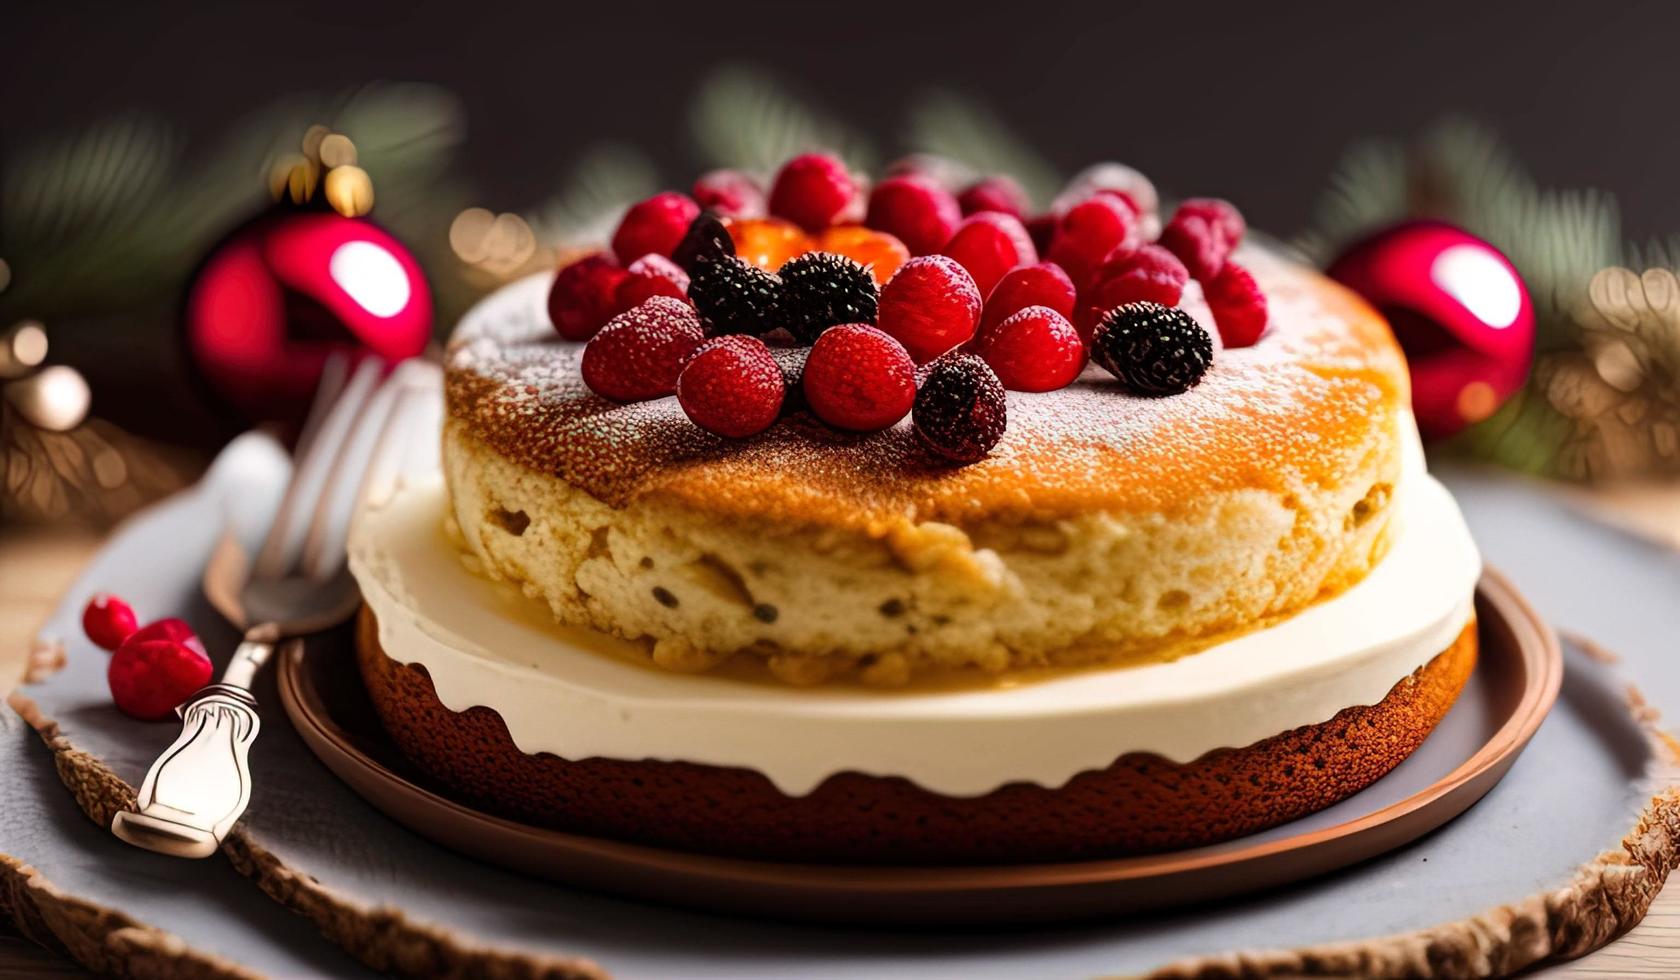 advertising professional food photography close up of a christmas cake photo